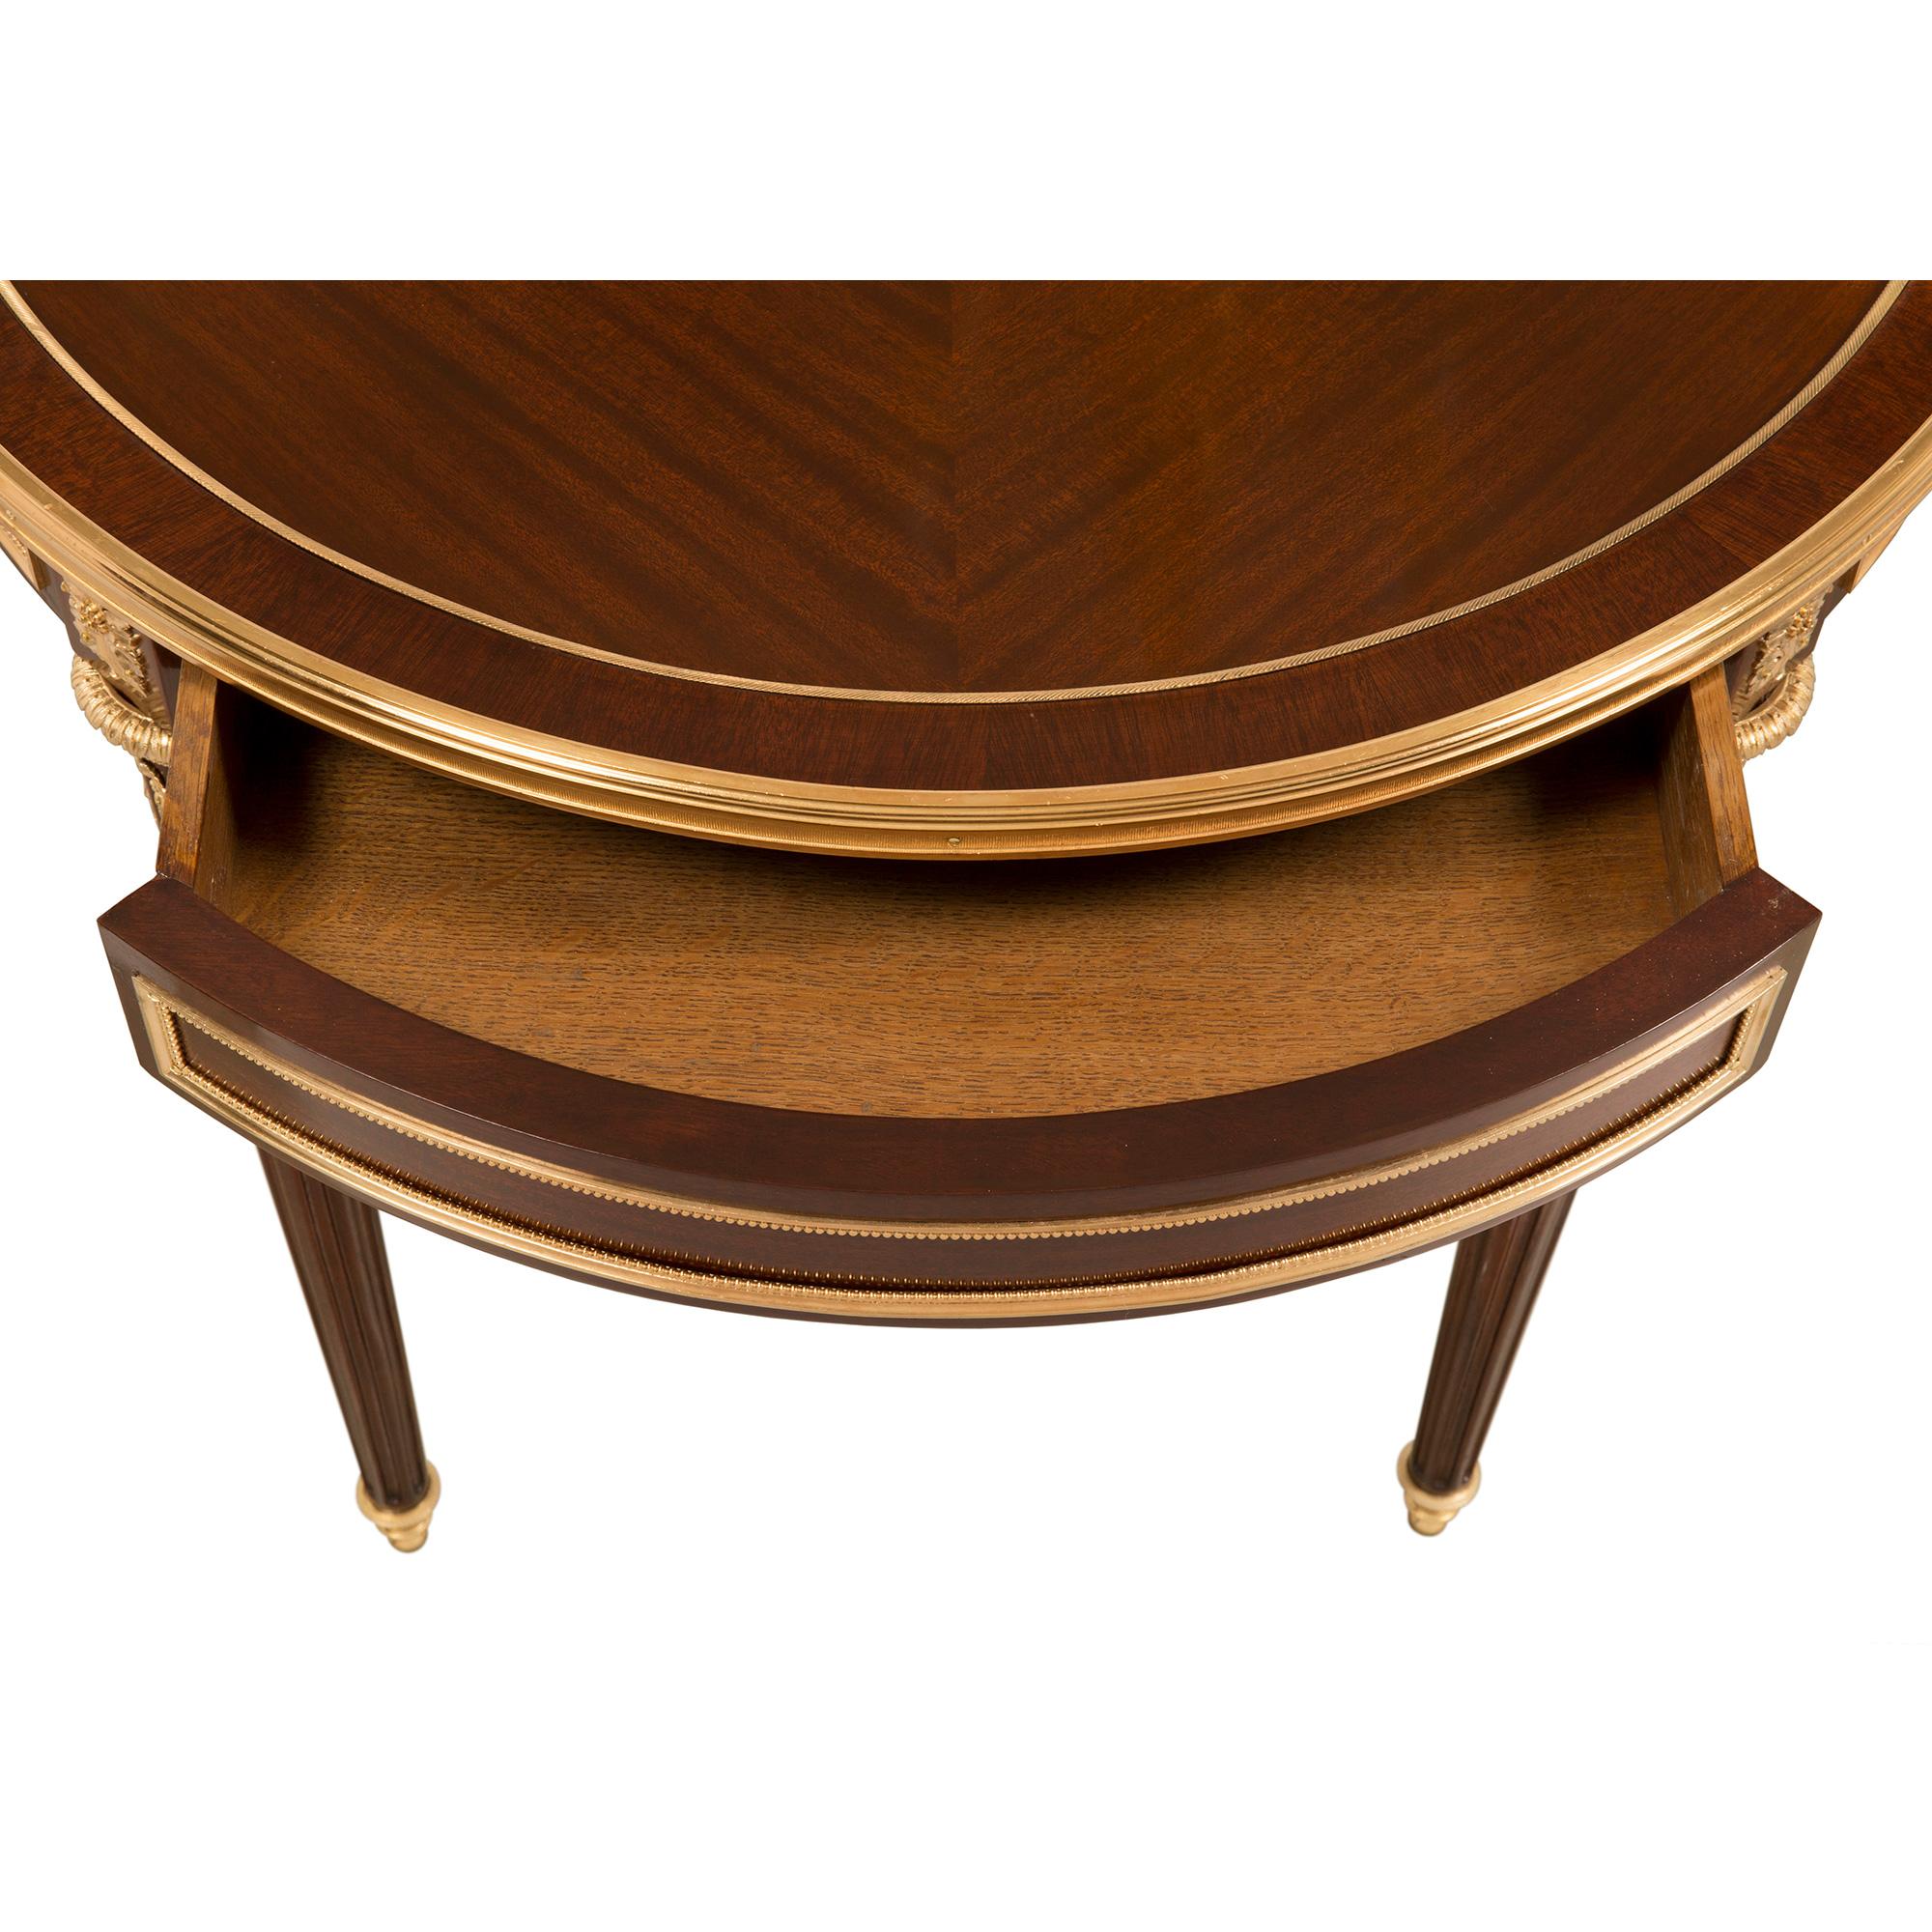 French 19th Century Louis XVI Style Mahogany Side Table, Attributed to Dasson For Sale 2